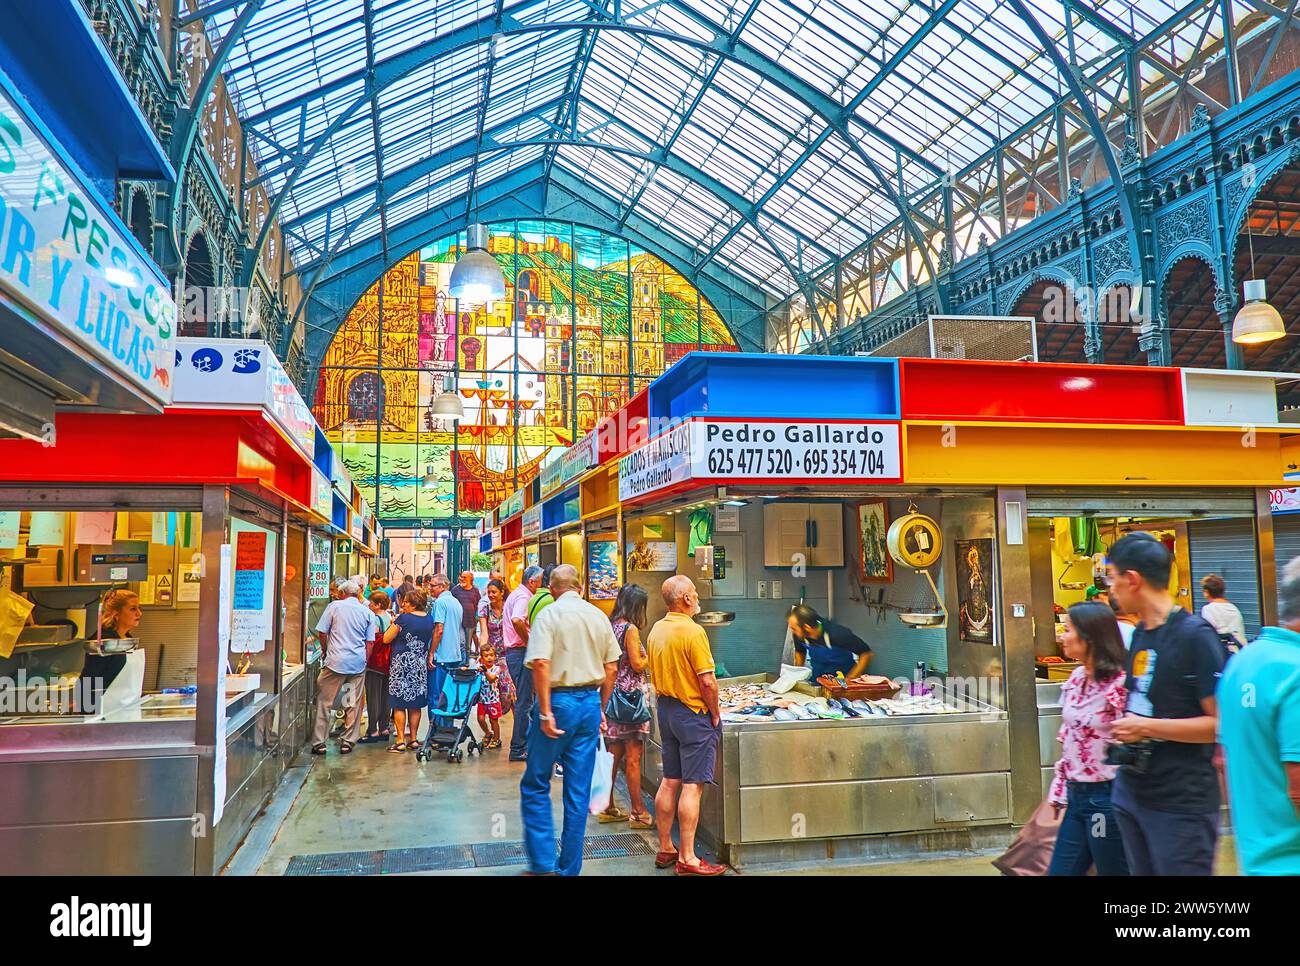 MALAGA, SPAIN - SEPT 28, 2019: People walk in fish section of Atarazanas central market, choosing fresh fish and seafood on ice, on Sept 28 in Malaga Stock Photo